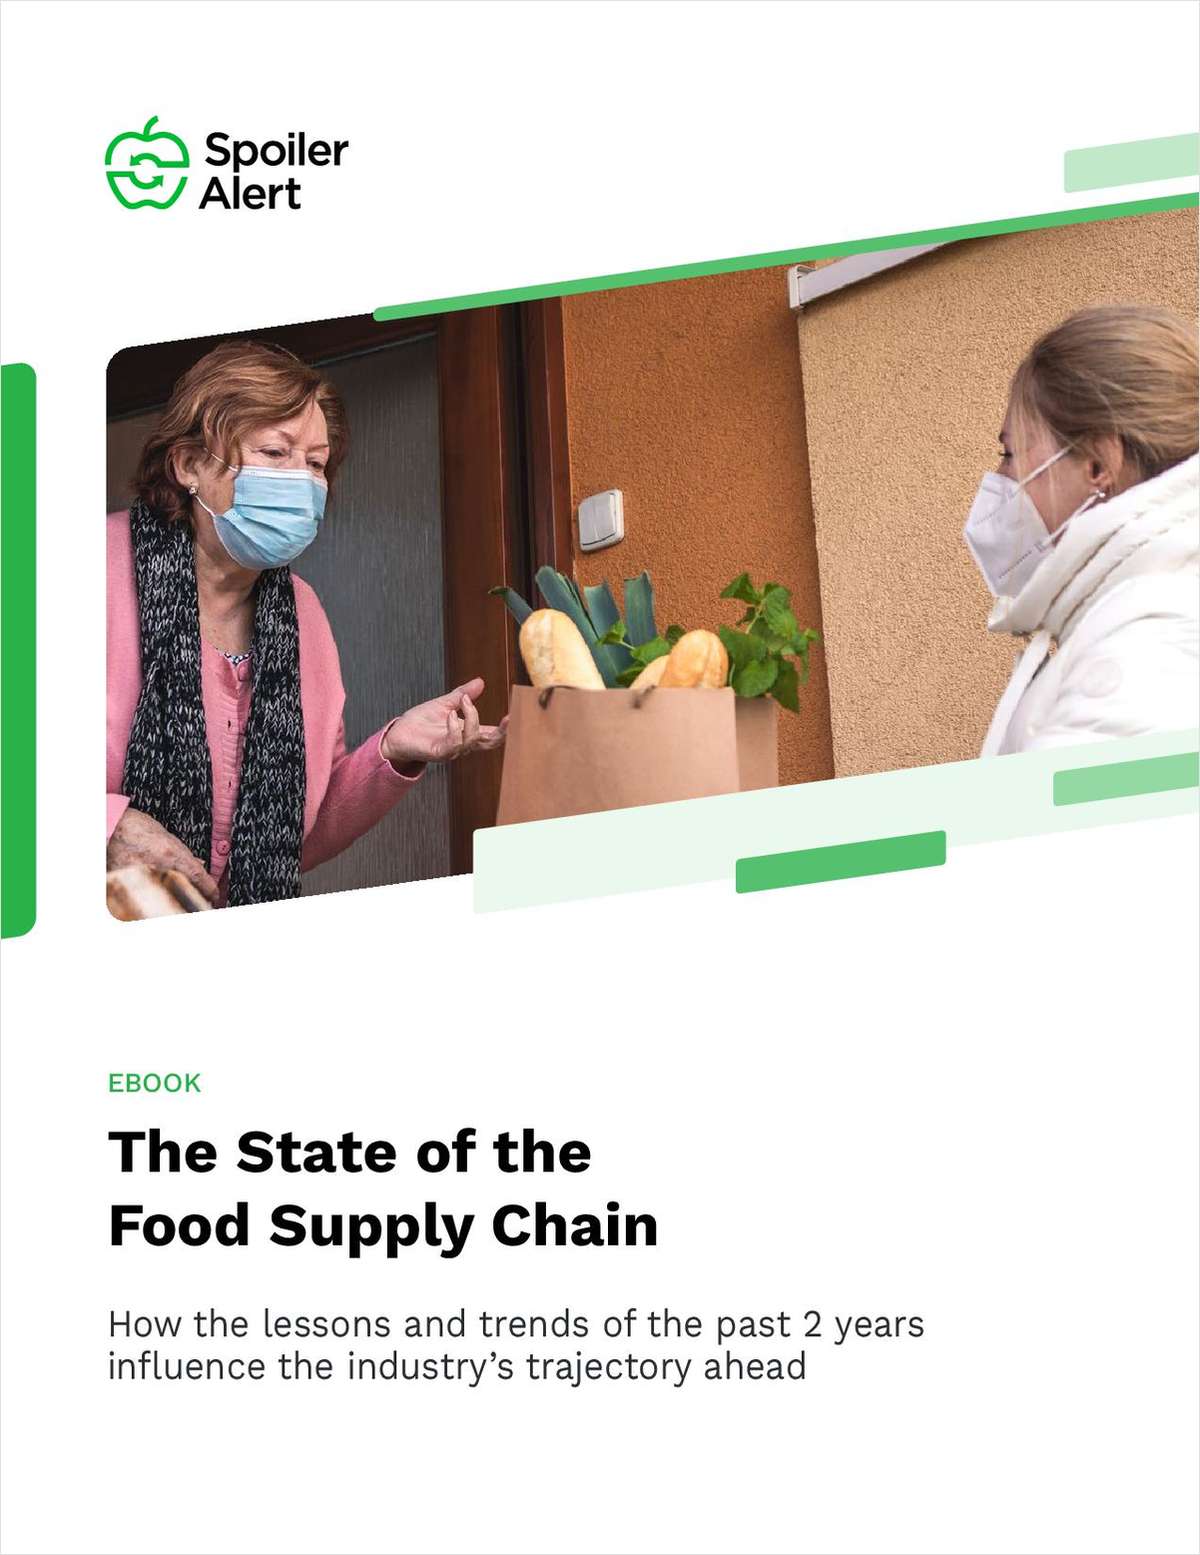 The State of the Food Supply Chain: How the lessons and trends of the past 2 years influence the industry's trajectory ahead